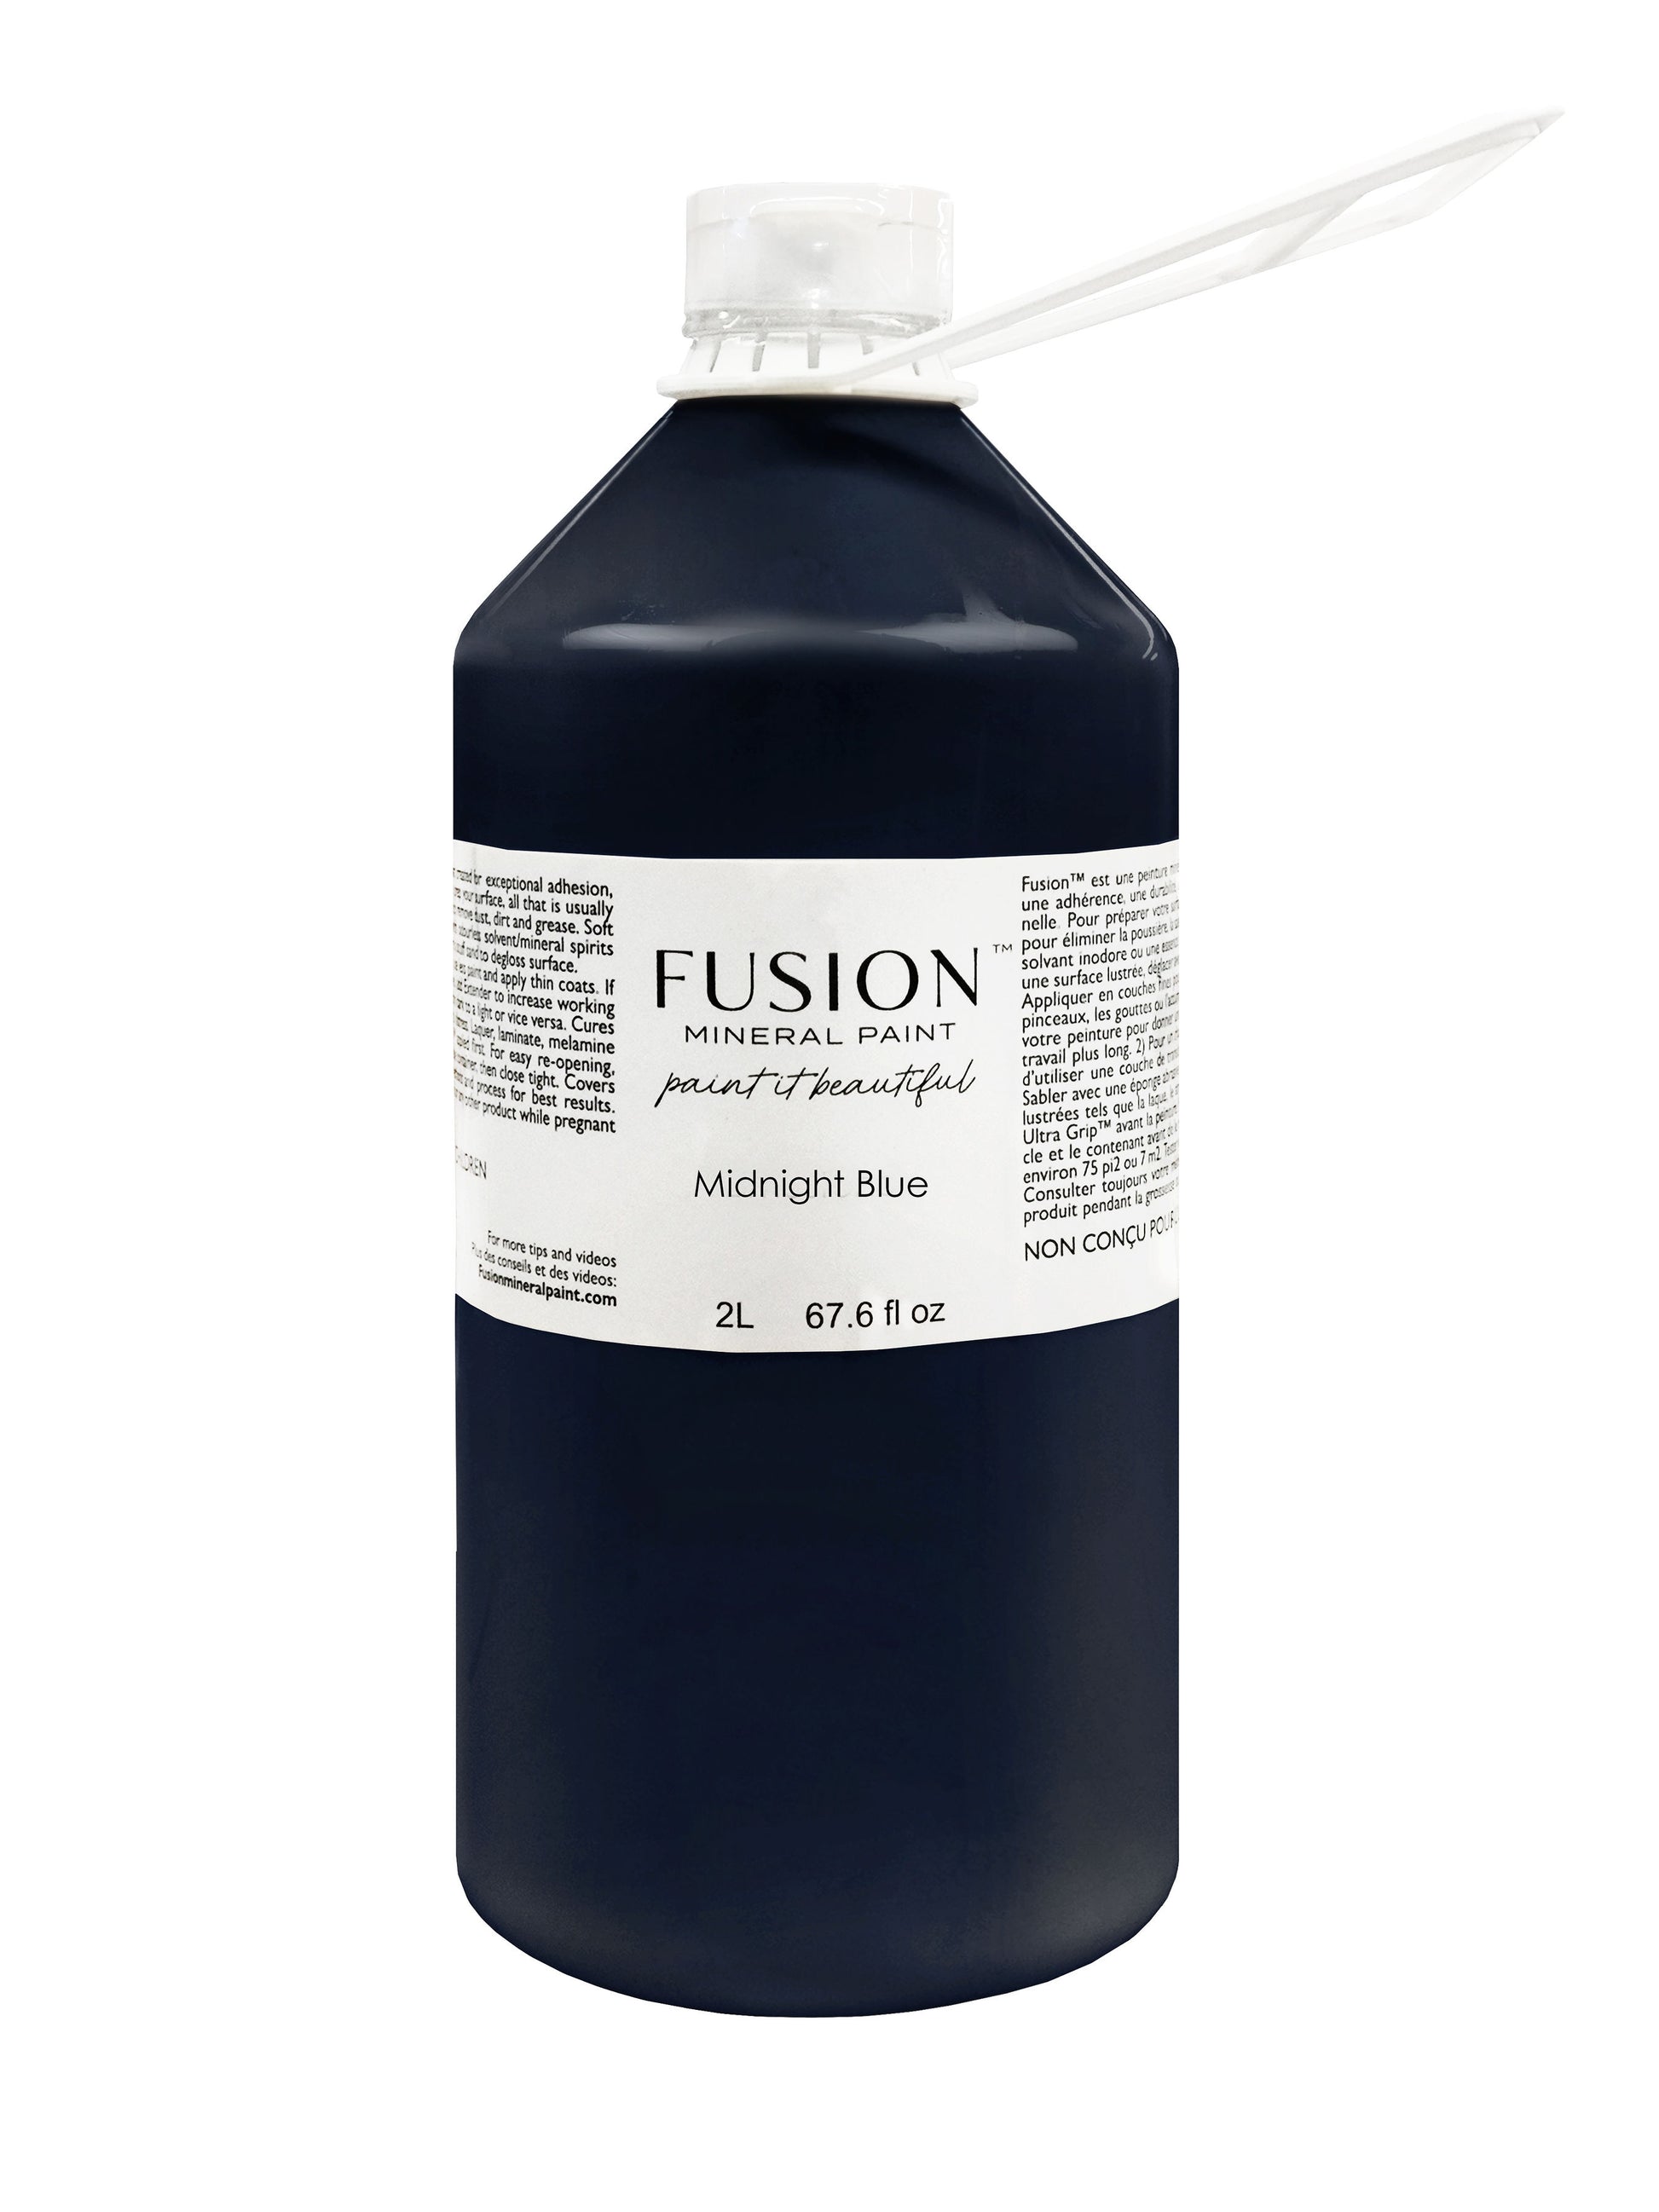 Serendipity Refined Blog: Product Review: Fusion Mineral Paint